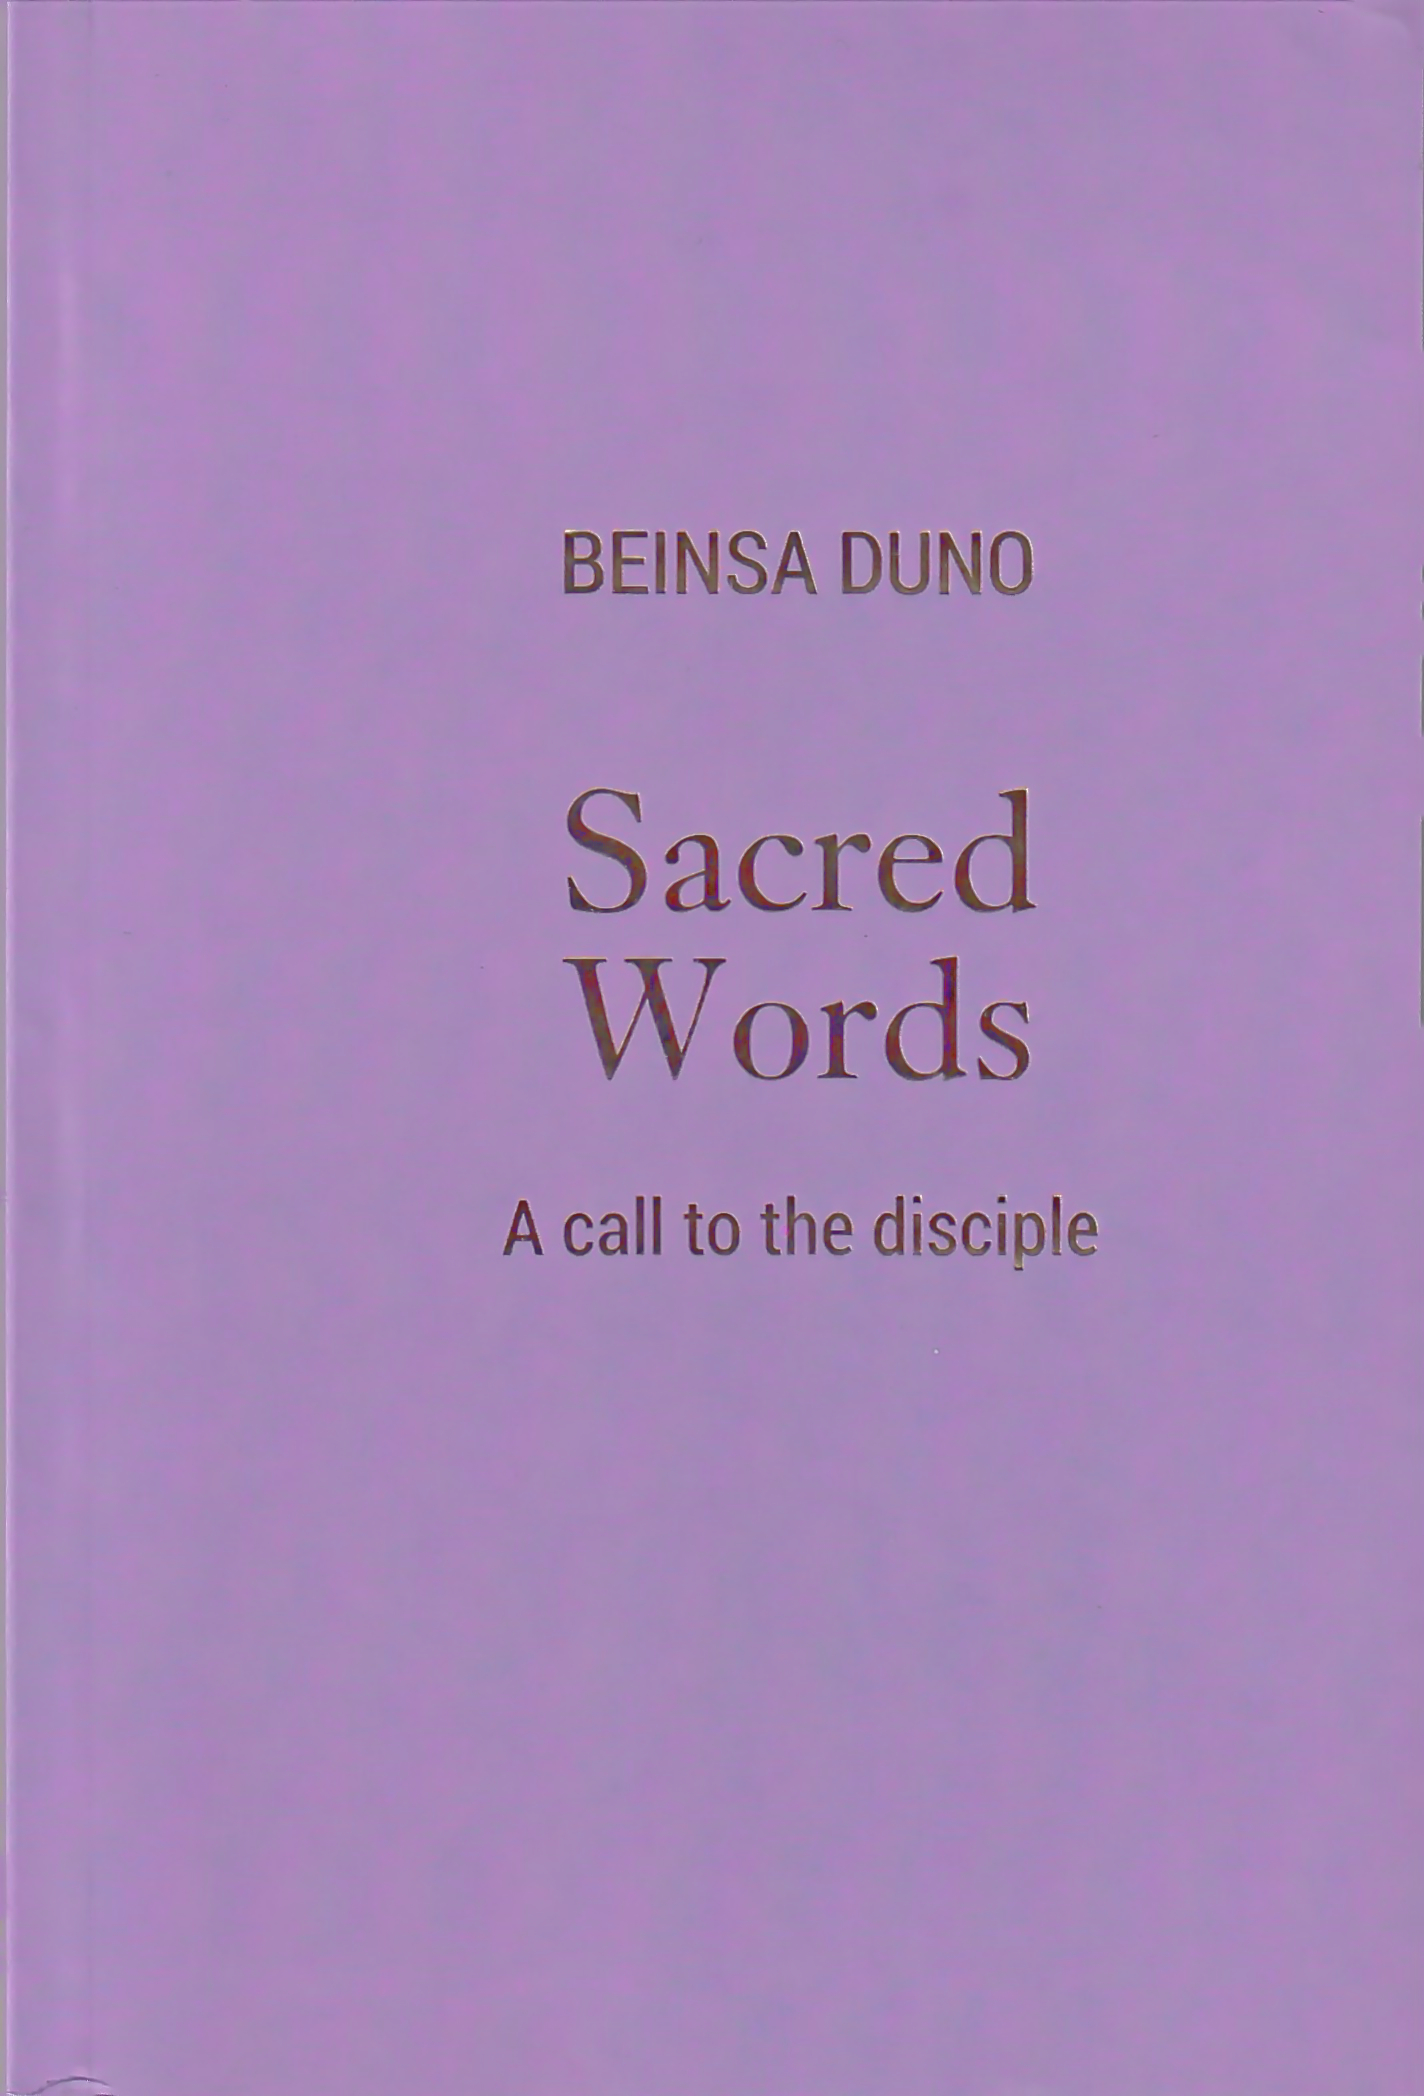 Sacred Words - A call to the disciple